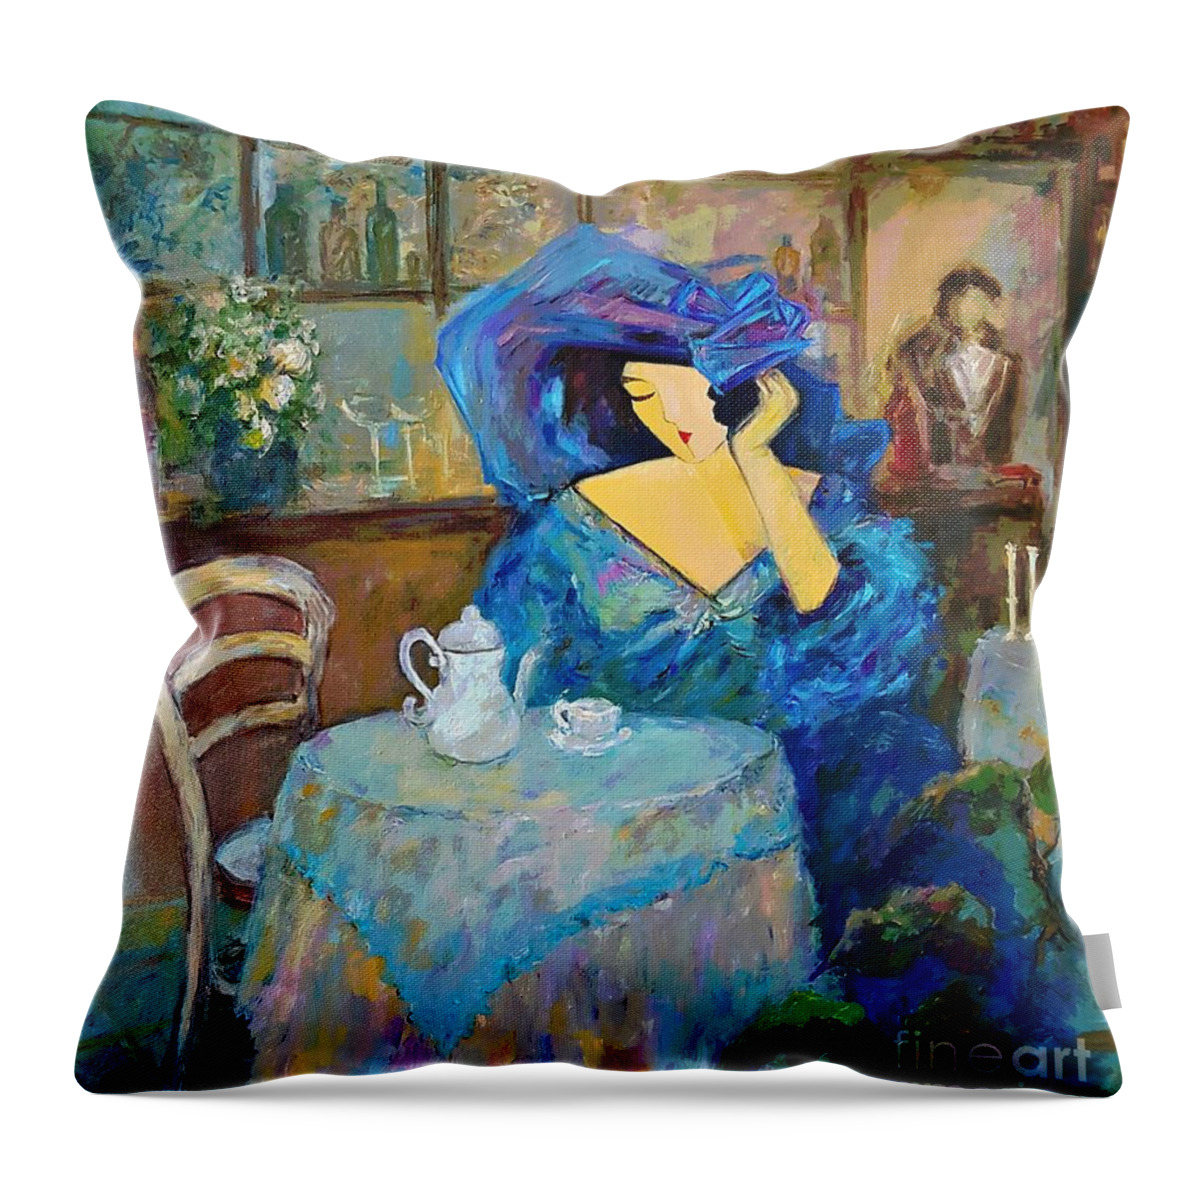 Painting Throw Pillow featuring the painting Blue Cafe by Amalia Suruceanu